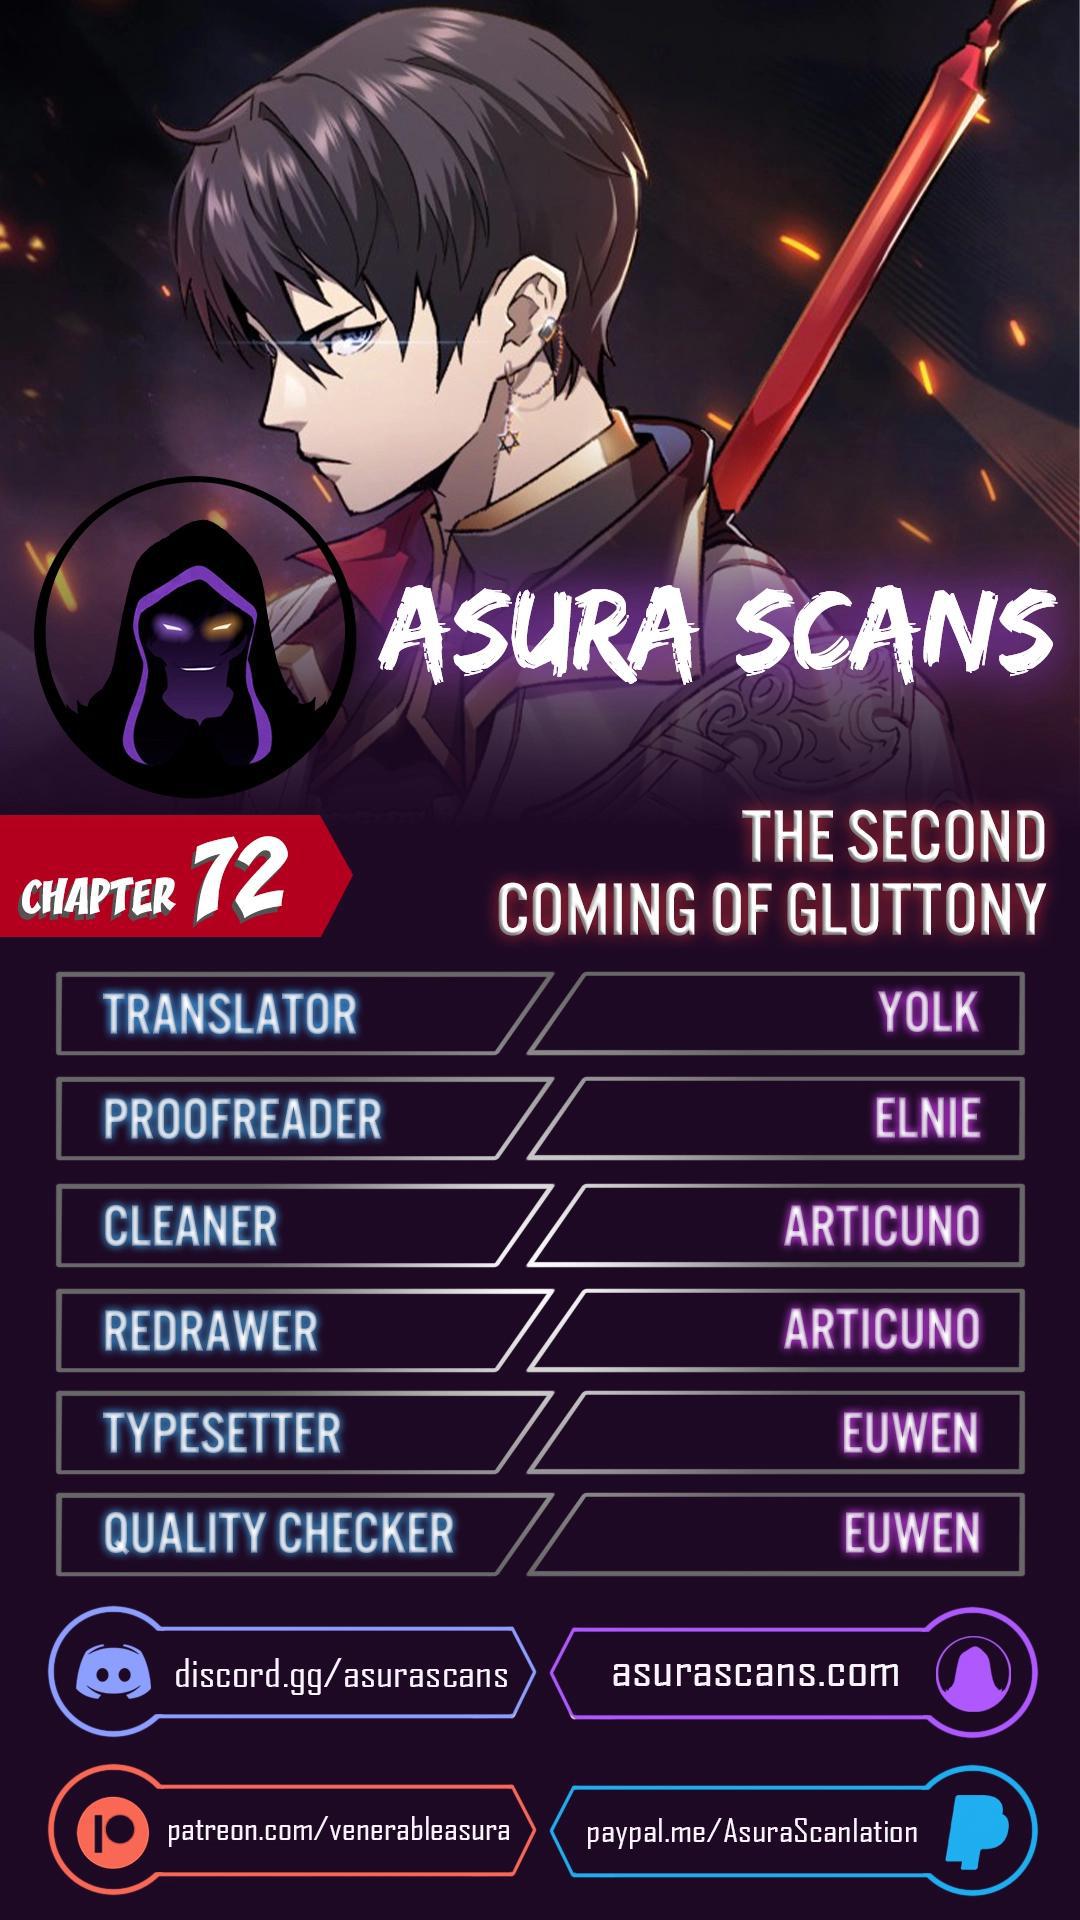 The Second Coming of Gluttony Chapter 72, The Second Coming of Gluttony 72, Read The Second Coming of Gluttony Chapter 72, The Second Coming of Gluttony Chapter 72 Manga, The Second Coming of Gluttony Chapter 72 english, The Second Coming of Gluttony Chapter 72 raw manga, The Second Coming of Gluttony Chapter 72 online, The Second Coming of Gluttony Chapter 72 high quality, The Second Coming of Gluttony 72 chapter, The Second Coming of Gluttony Chapter 72 manga scan